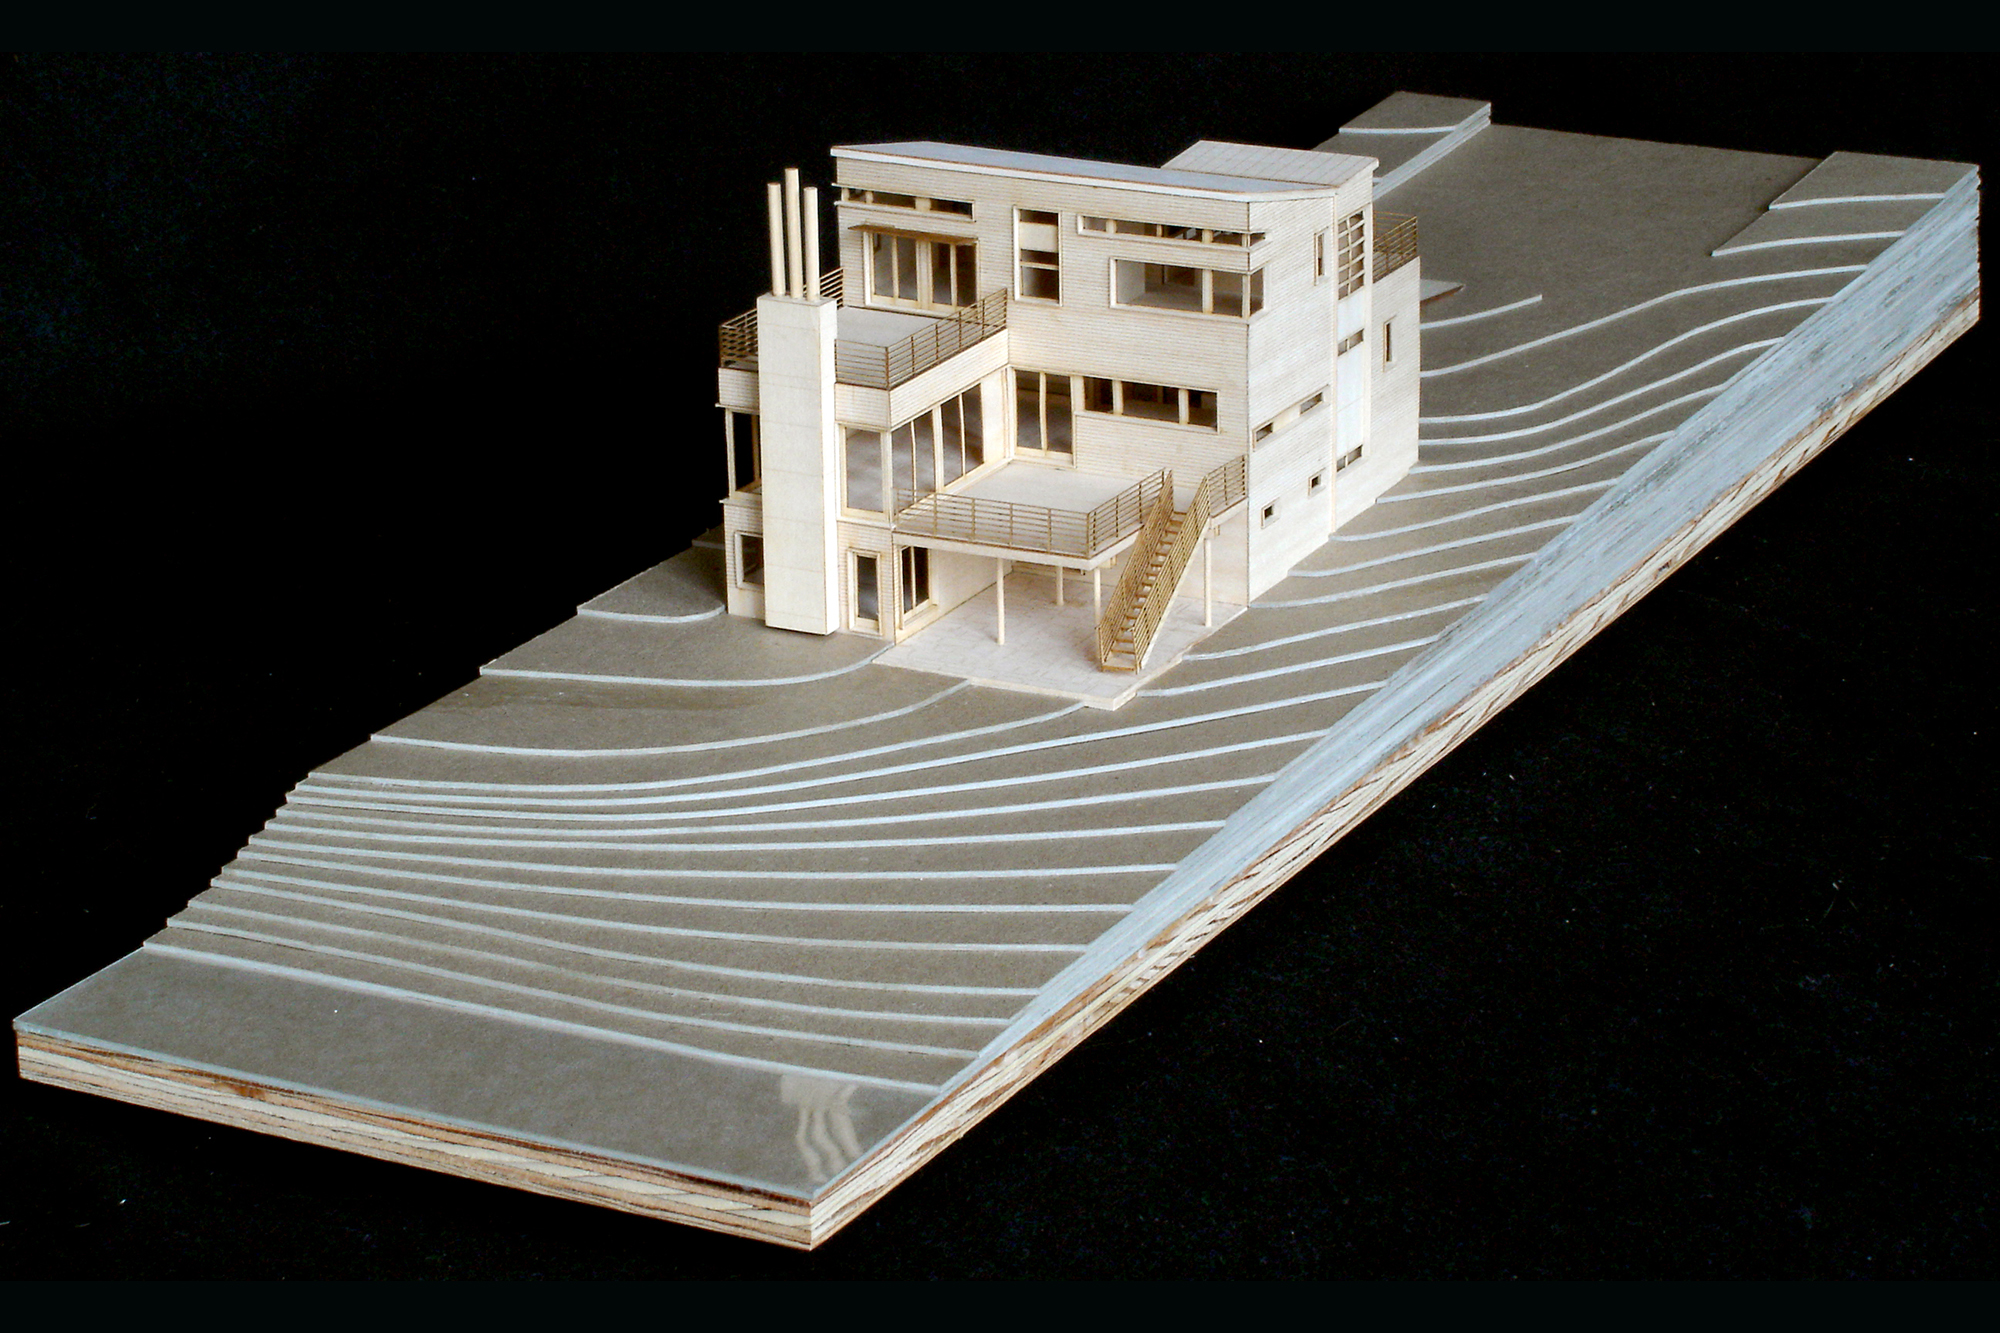 res4-resolution-4-architecture-house on chesapeake bay-model-01.jpg